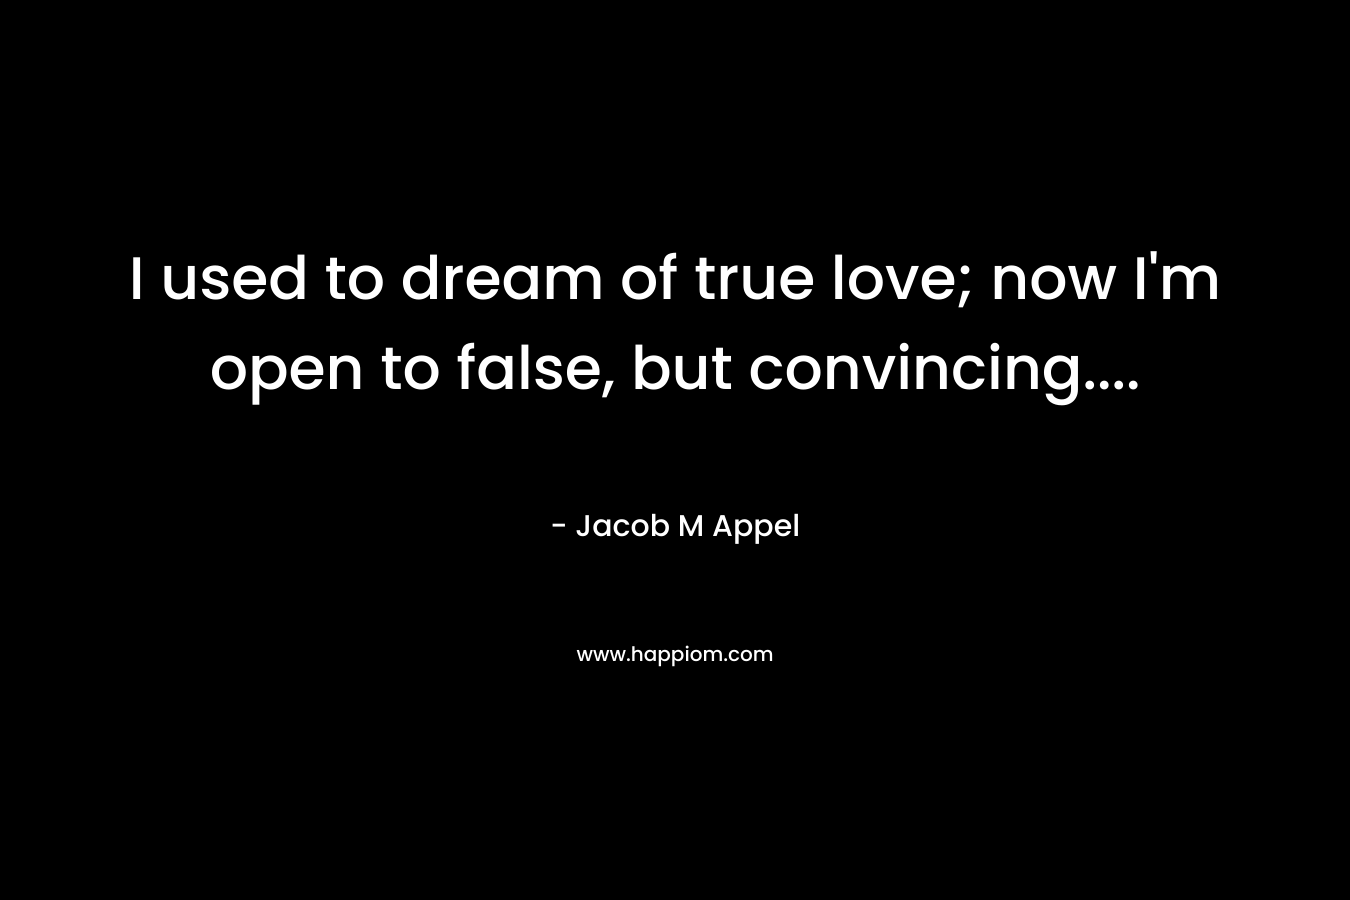 I used to dream of true love; now I'm open to false, but convincing....